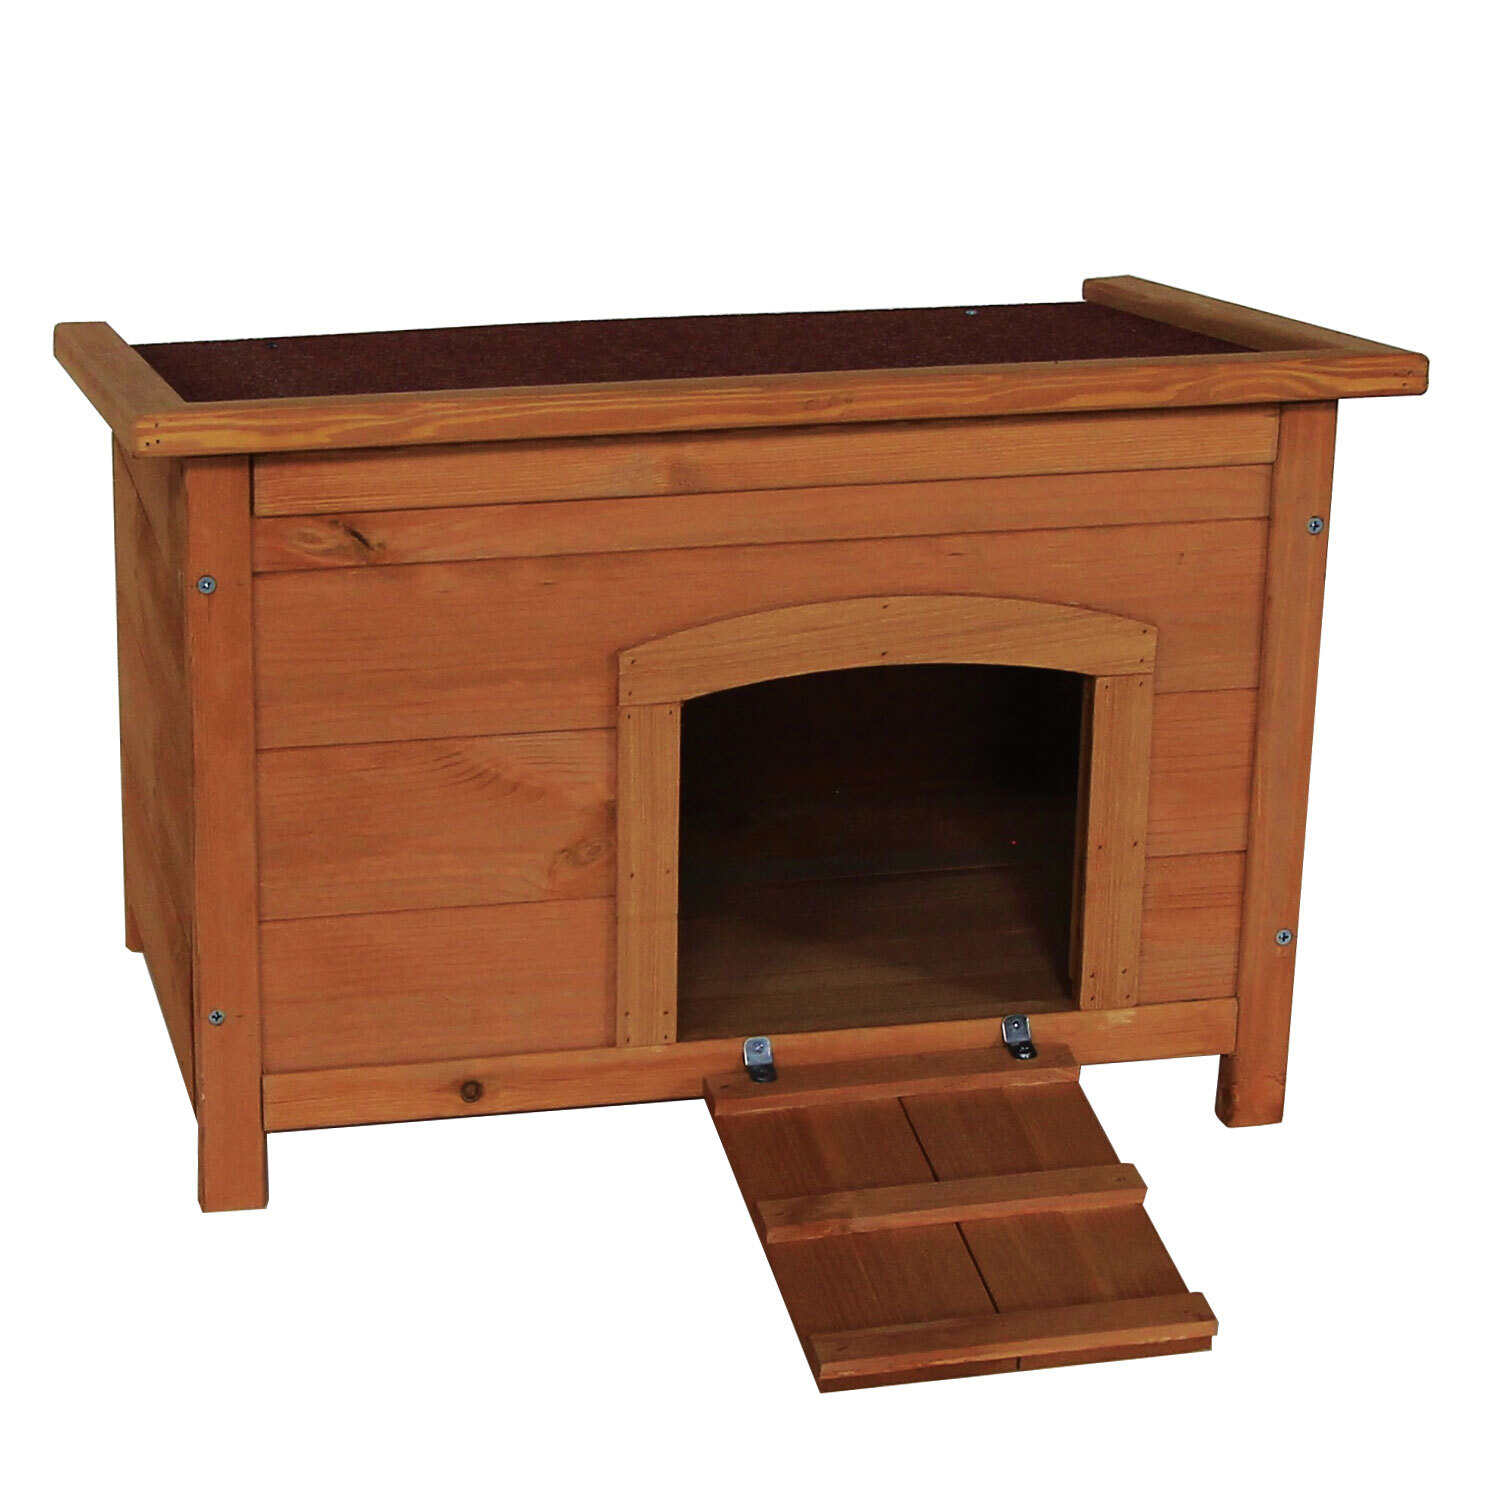 Small Animal Wooden Hutch Image